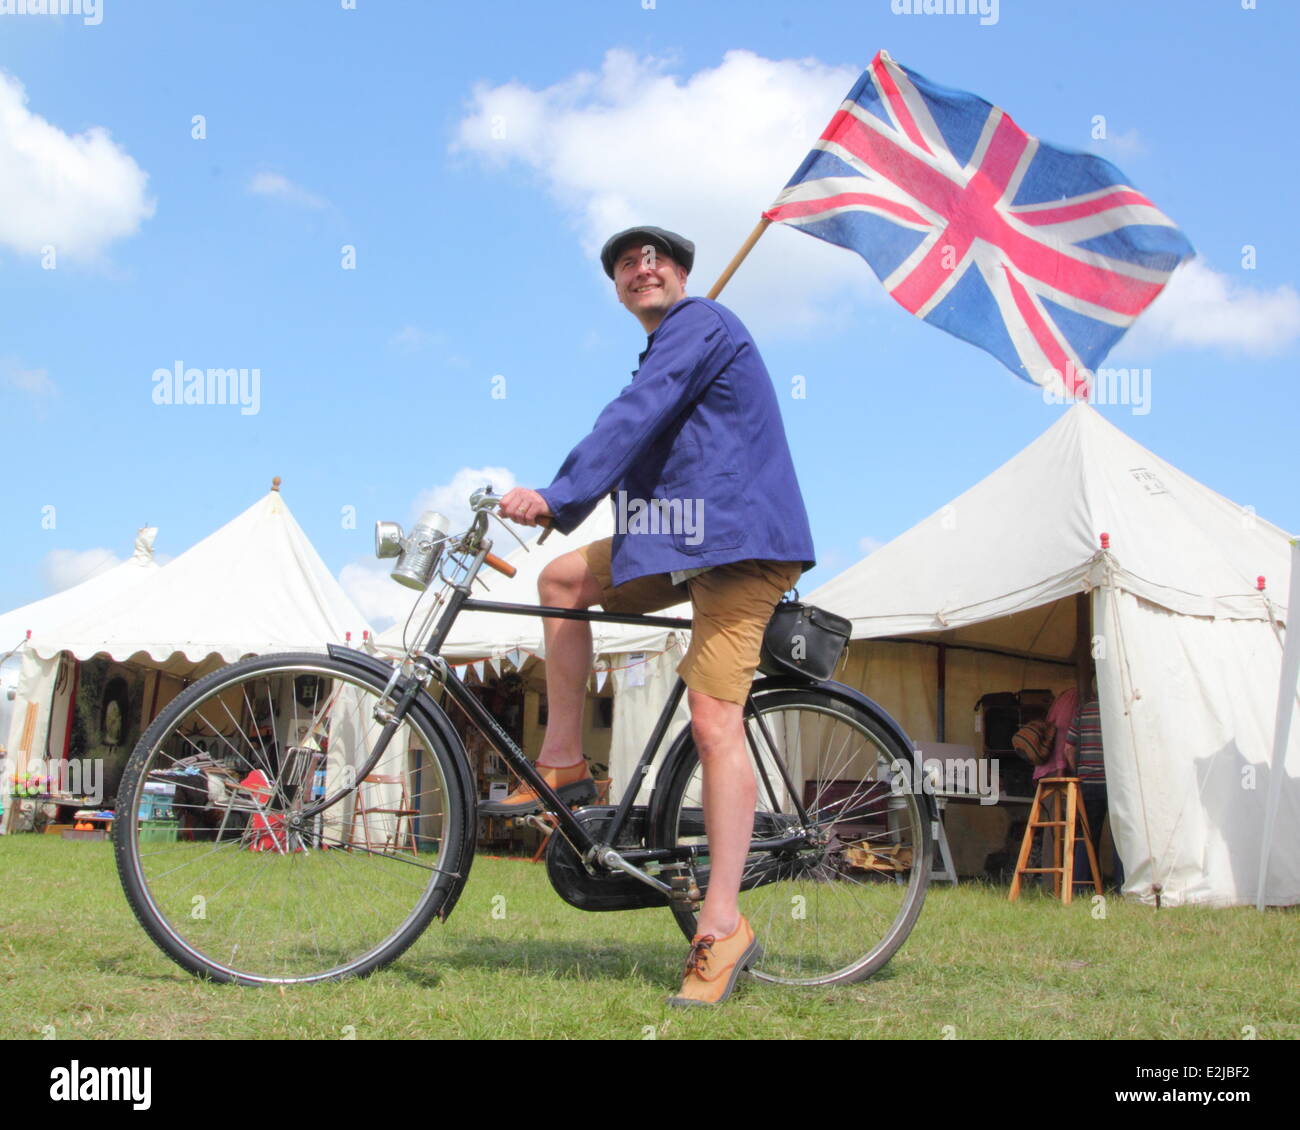 Bakewell, Derbyshire, UK 20 June'14. Simon Doughty from Leicestershire gets into the spirit of the inaugural L'Eroica Britannia festival that celebrates vintage cycling, retro fashion & local gastronomy. An annual cycling festival held in Italy since 1997, this is the first time the event has been held in the UK. At the heart of the festival is a three route tour of the Peak District. Sculptor, Simon is signed up to the 30 mile tour, riding his 1930's former Northamptonshire police force Raleigh bike. © Deborah Vernon/Alamy Live News Credit:  Deborah Vernon/Alamy Live News Stock Photo